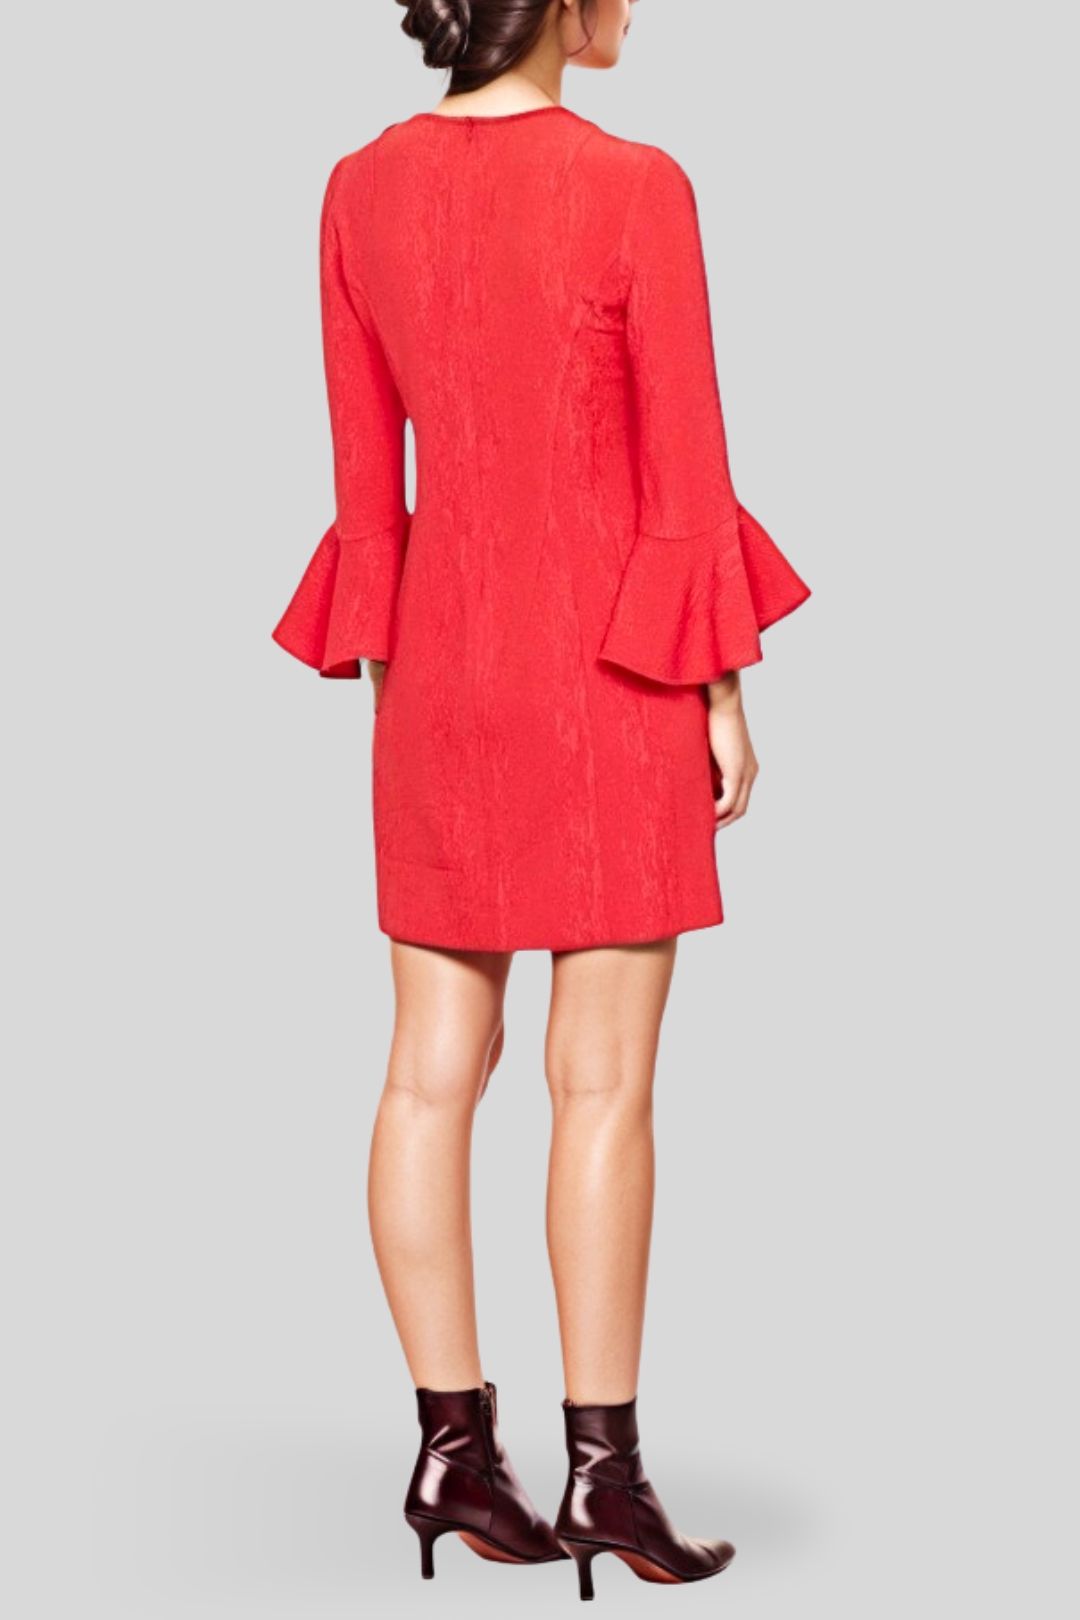 Veronika Maine - Jacquard Fitted Dress in Red Back